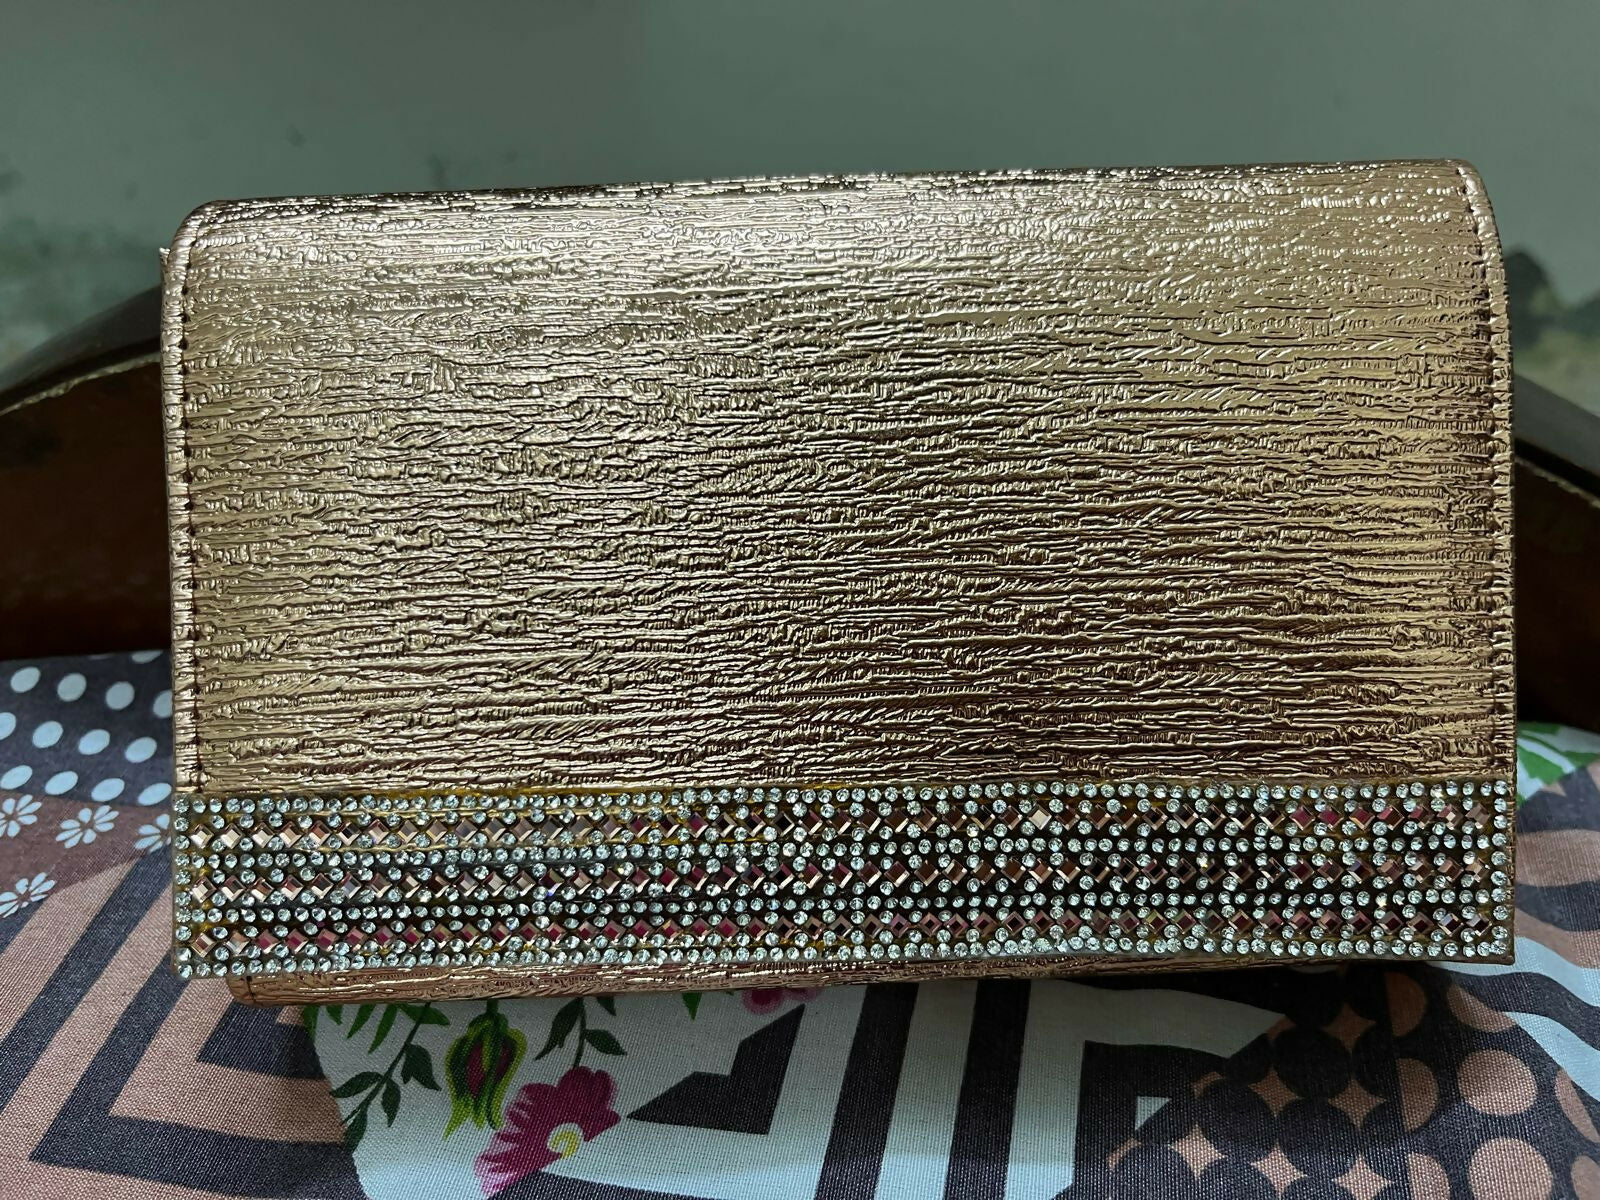 D'Margeaux | Shiny Gold Clutch with Stones | Women Bags | New